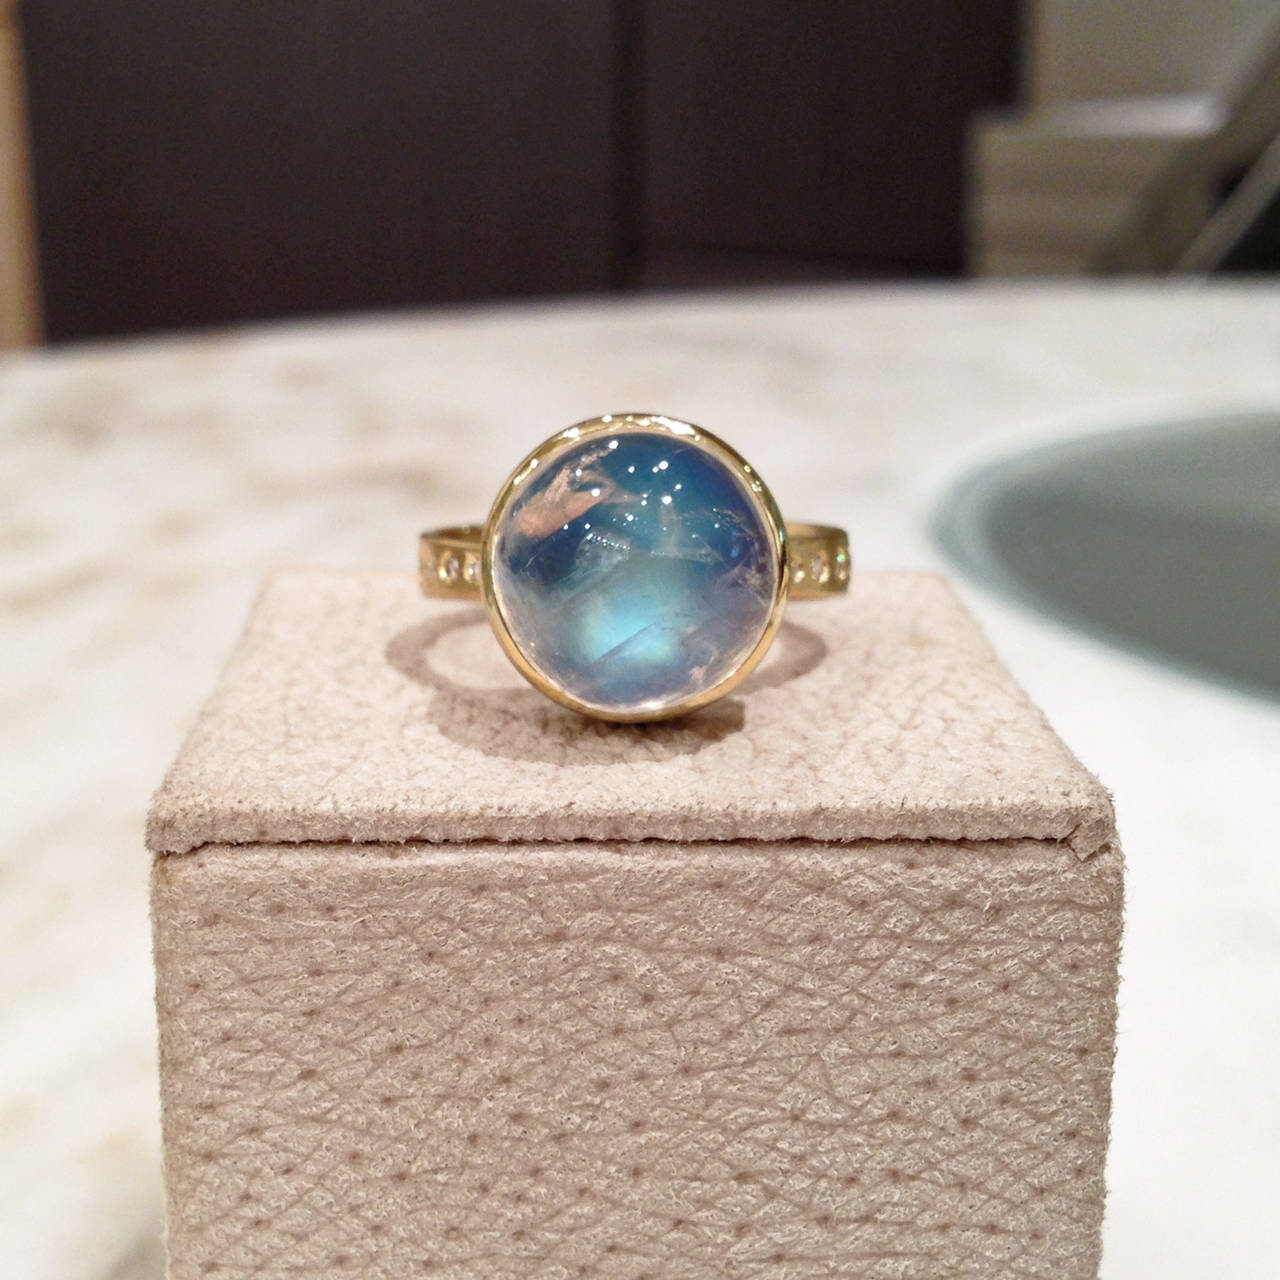 One-of-a-Kind Button Ring handcrafted in matte 18k yellow gold with a 7.94 carat cabochon-cut blue moonstone set in a shiny 18k gold bezel, and accented with eight VS1 white diamonds. Size 7.25 (can be sized).

Moonstone exhibits spectacular